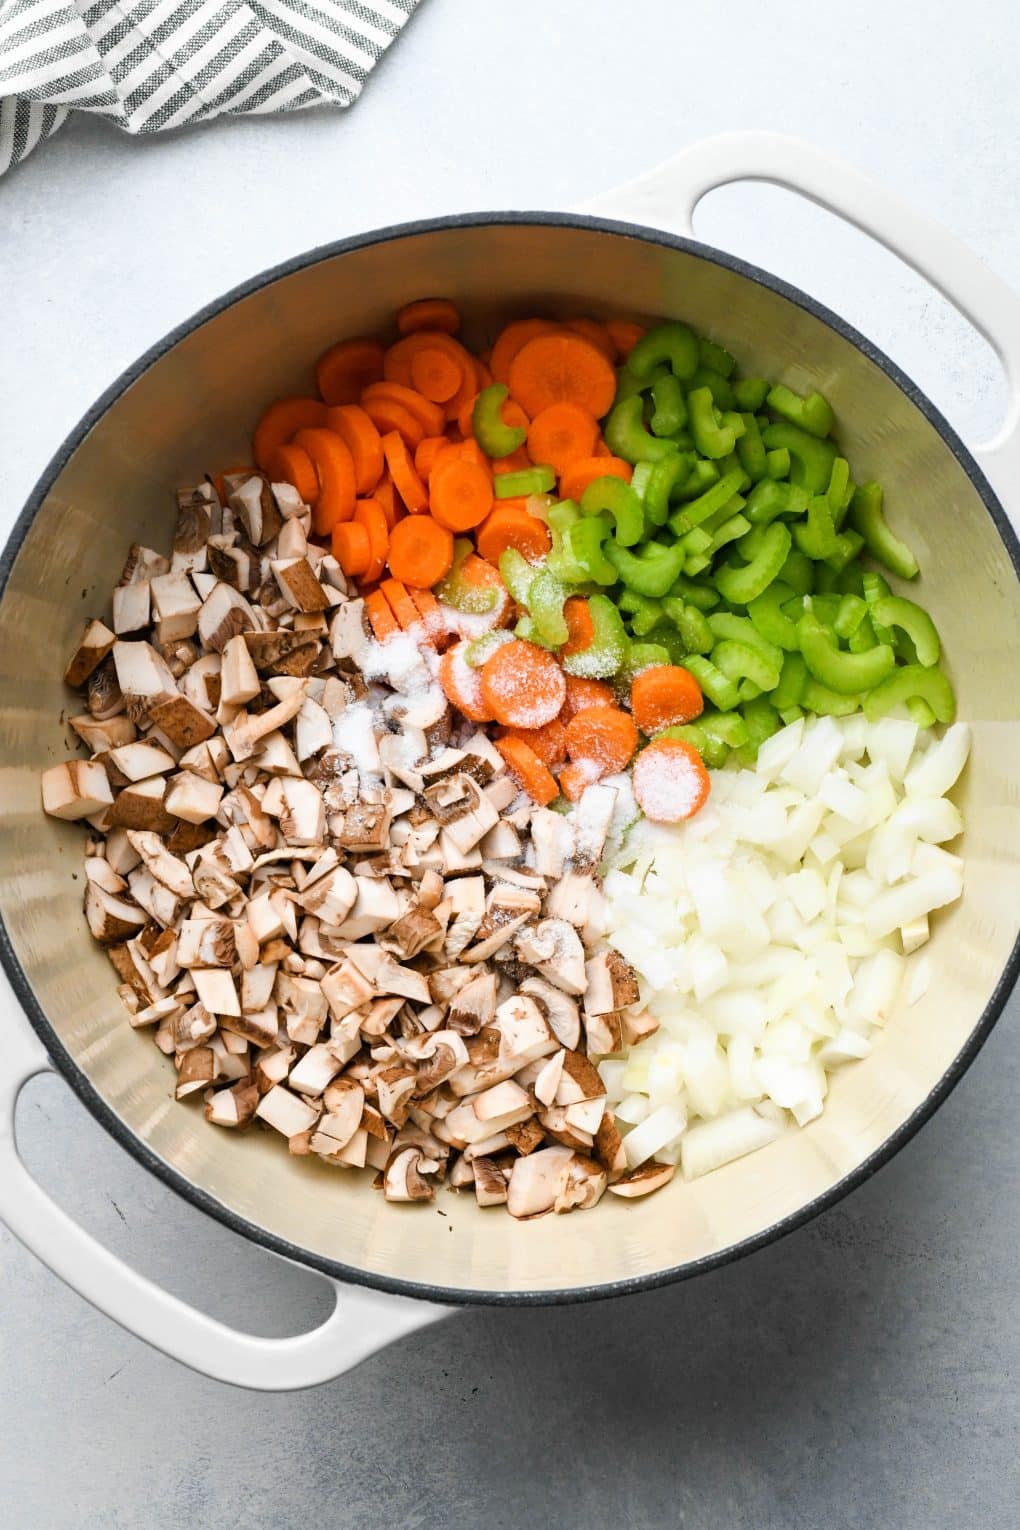 How to make Creamy Dairy Free Chicken and Cauliflower Rice Soup: Raw aromatics and veggies in soup pot with olive oil.